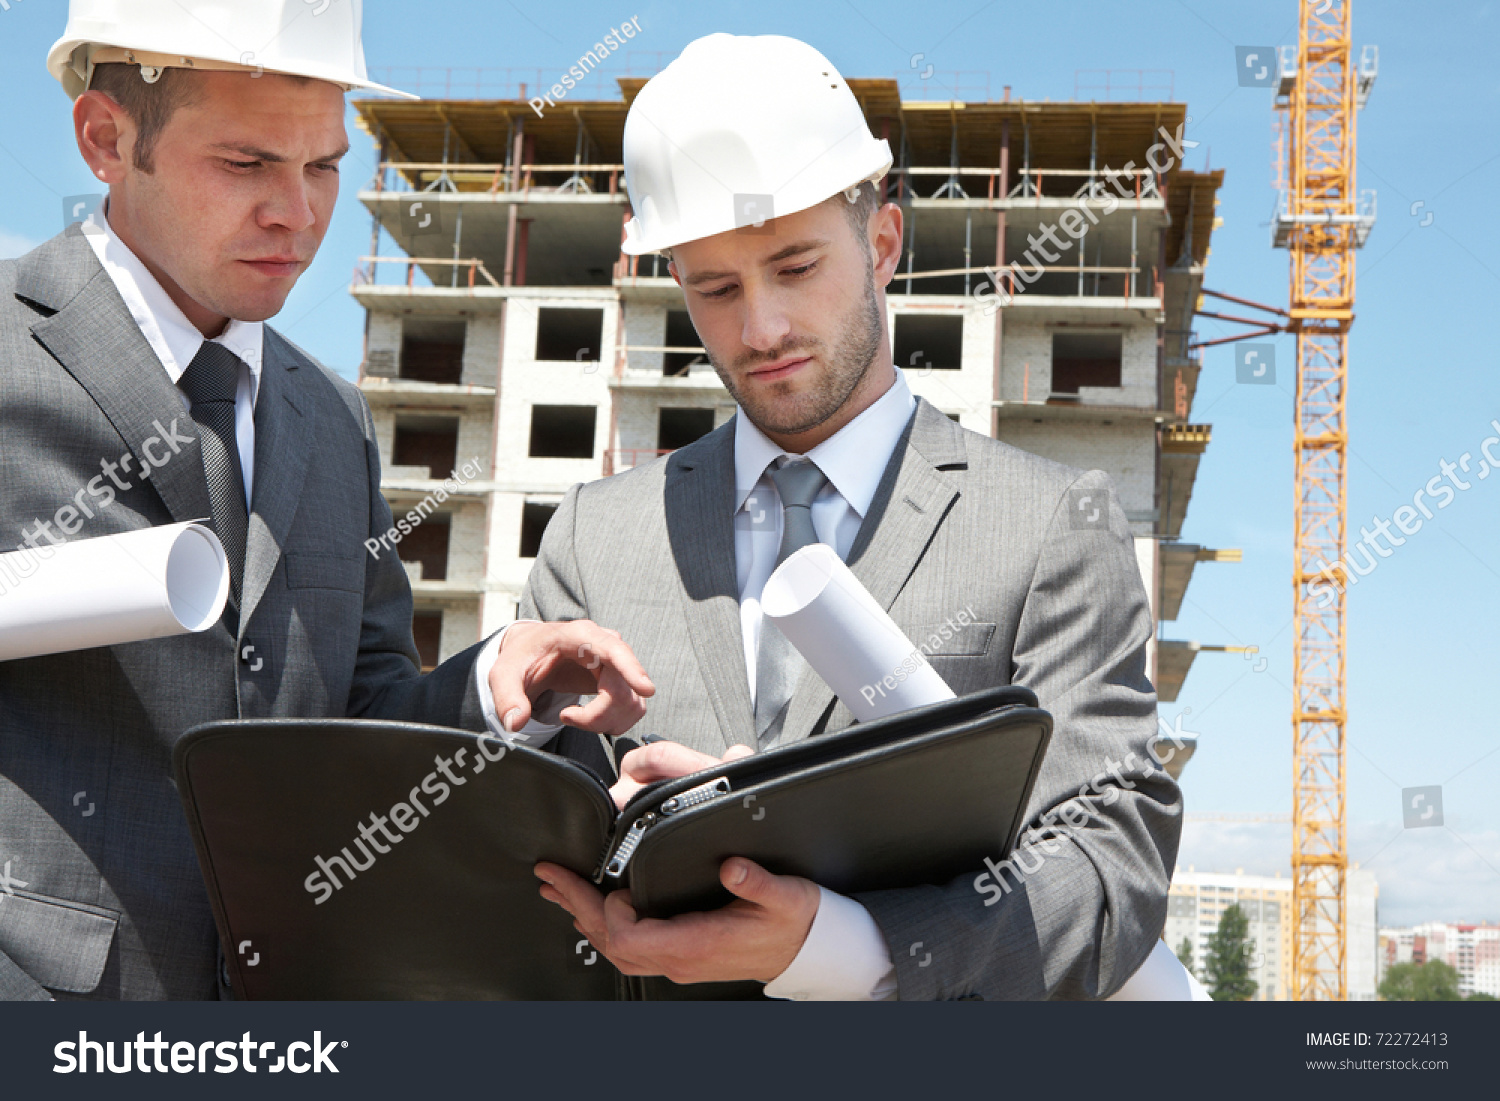 Portrait of two builders standing at building site and discussing new project held by one of them #72272413